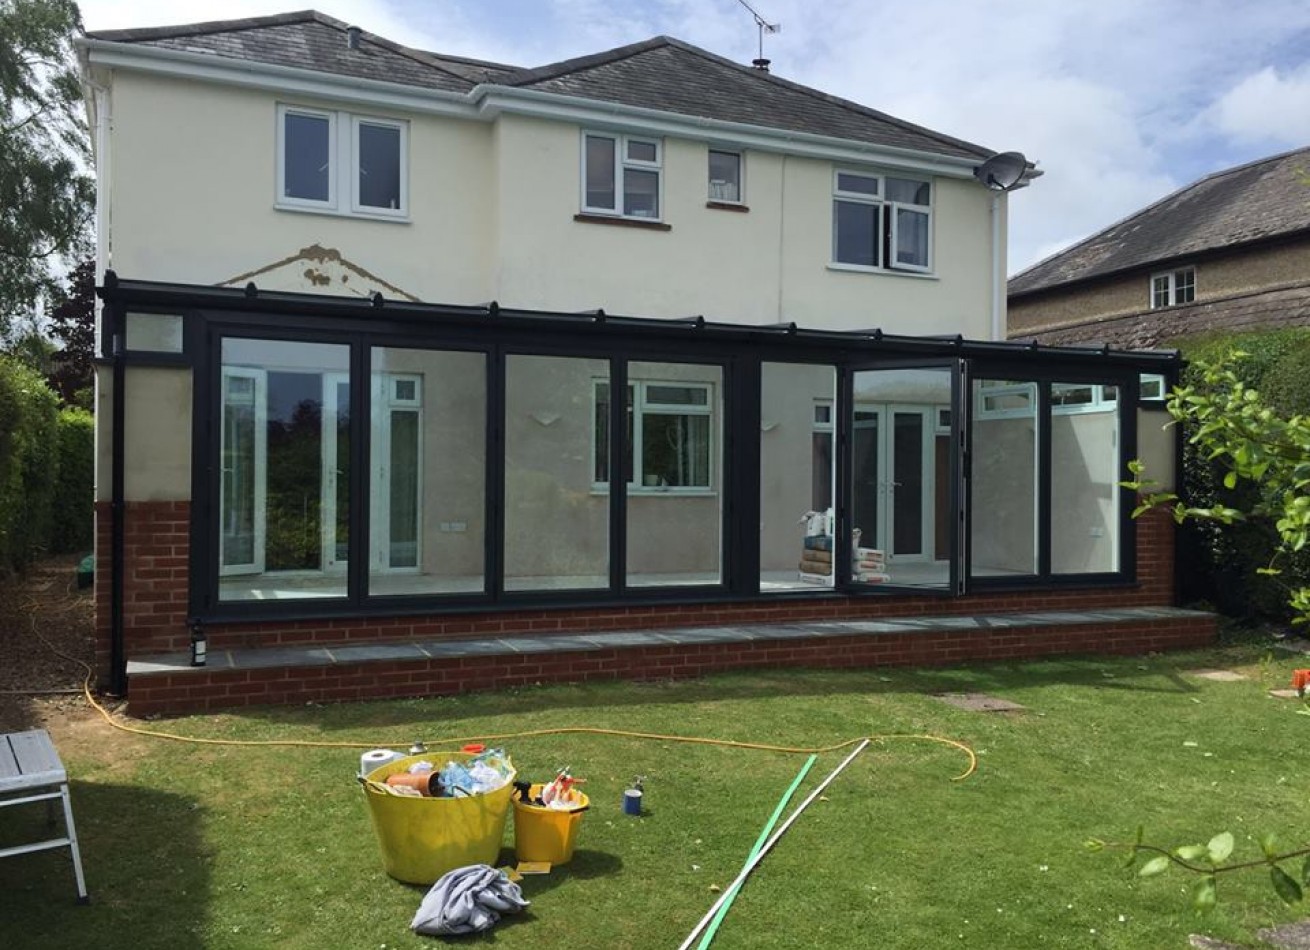 Lean to conservatory with bifold doors